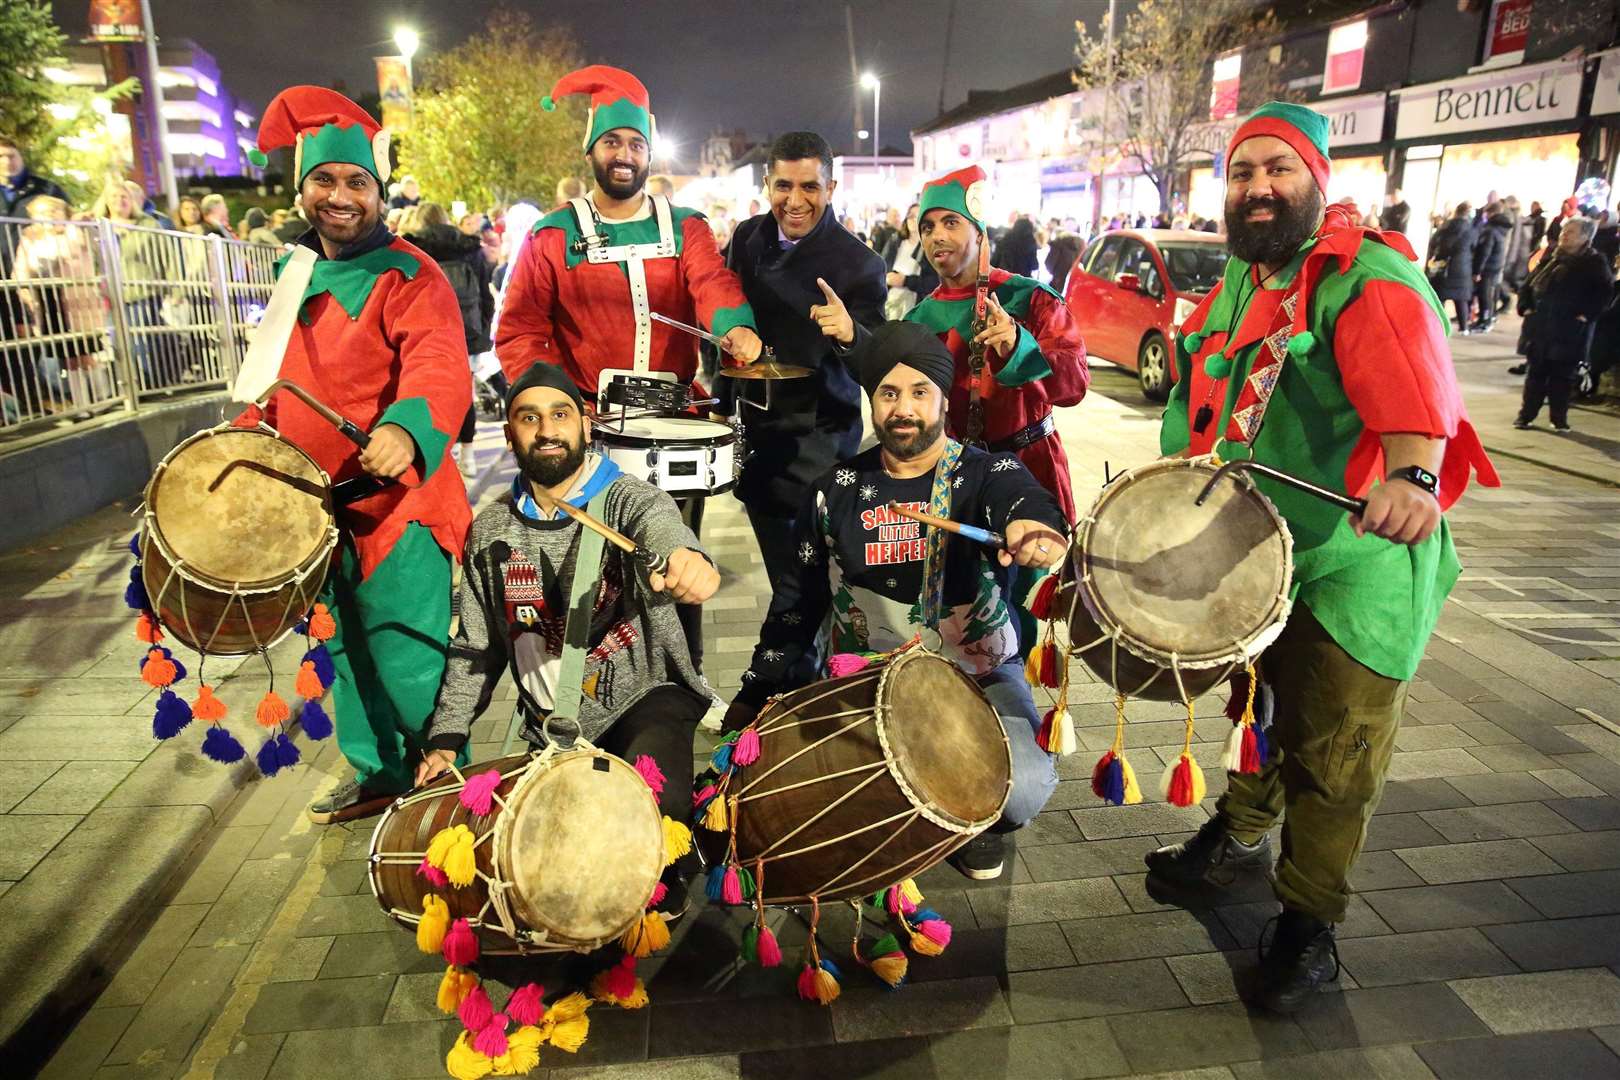 Bands such as Kings of Dhol performed